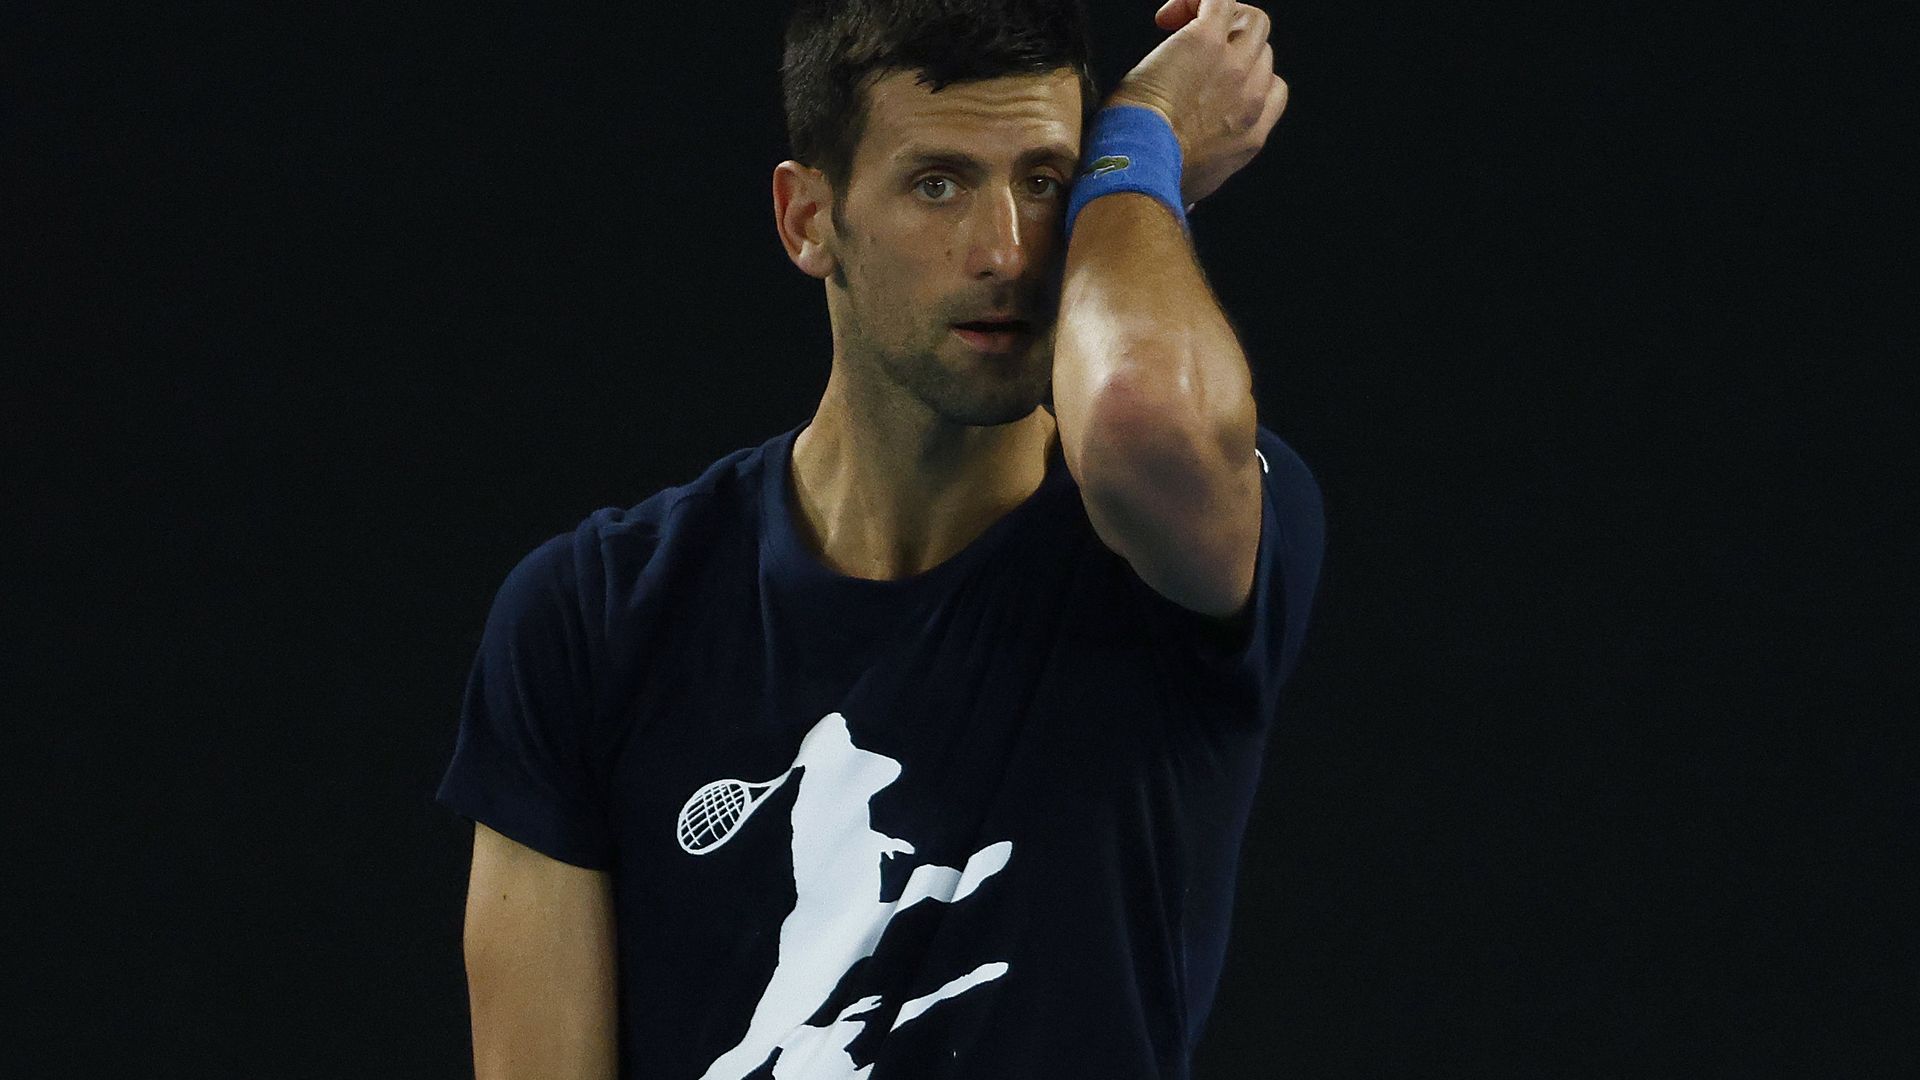 Novak Djokovic of Serbia wipes sweat during a practice session ahead of the 2022 Australian Open at Melbourne Park on January 14, 2022 in Melbourne, Australia.  